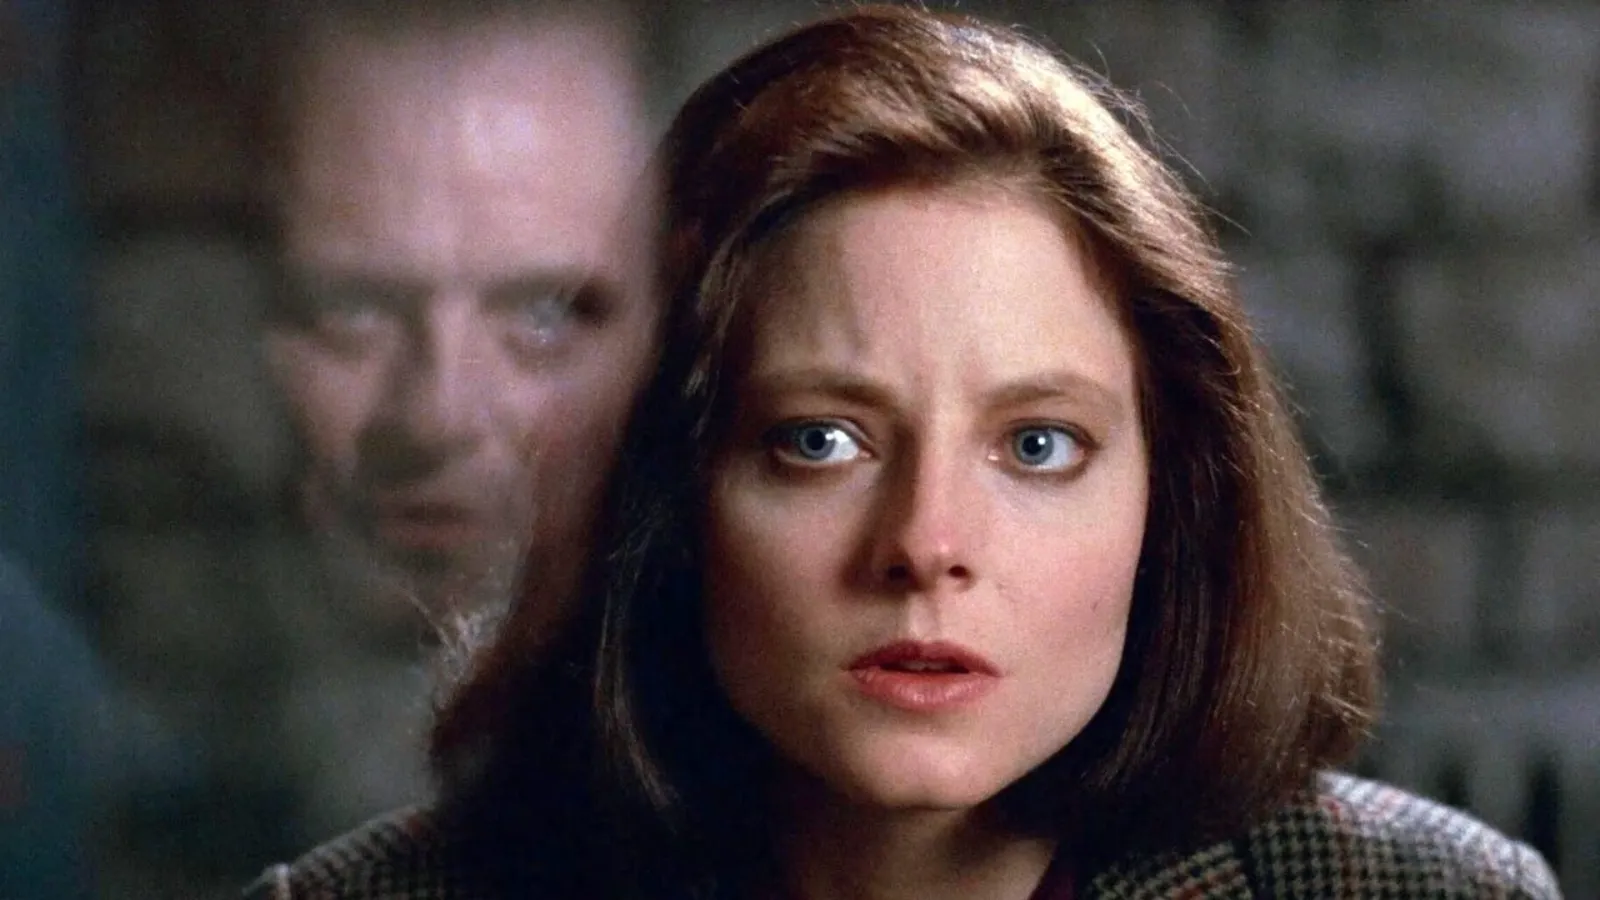 Jodie Foster and Anthony Hopkins as Clarice Starling and Hannibal Lecter